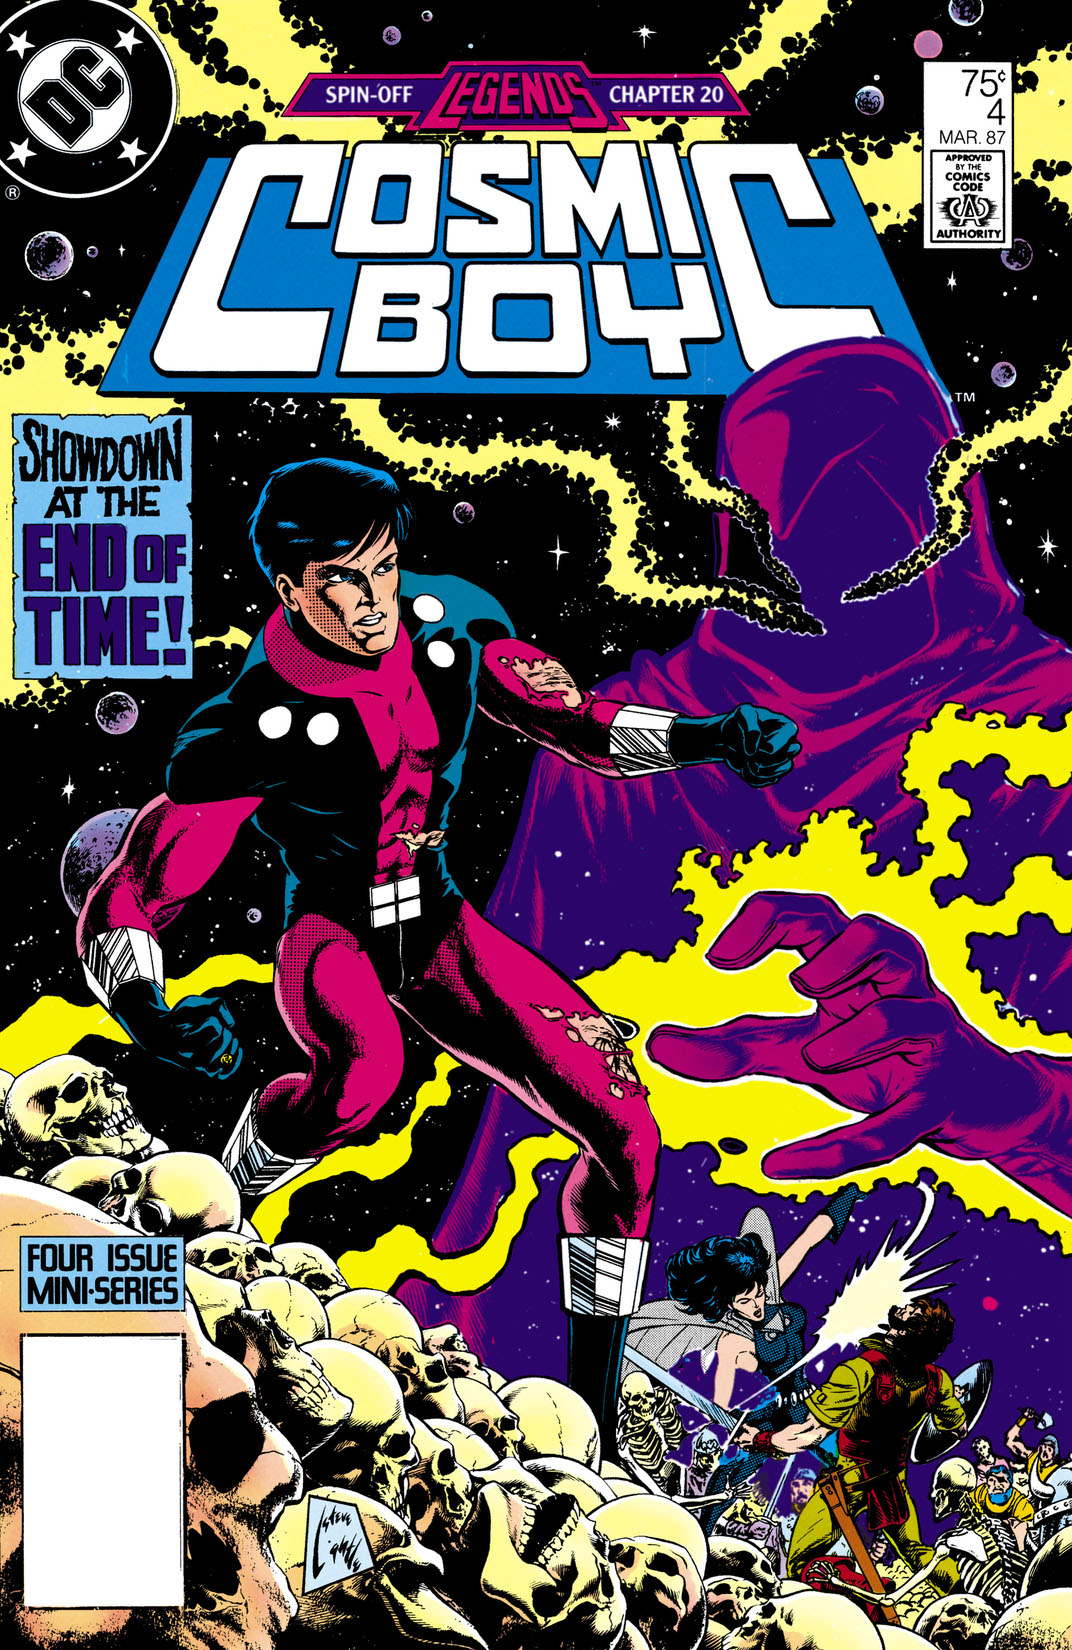 Cosmic Boy #4 preview images